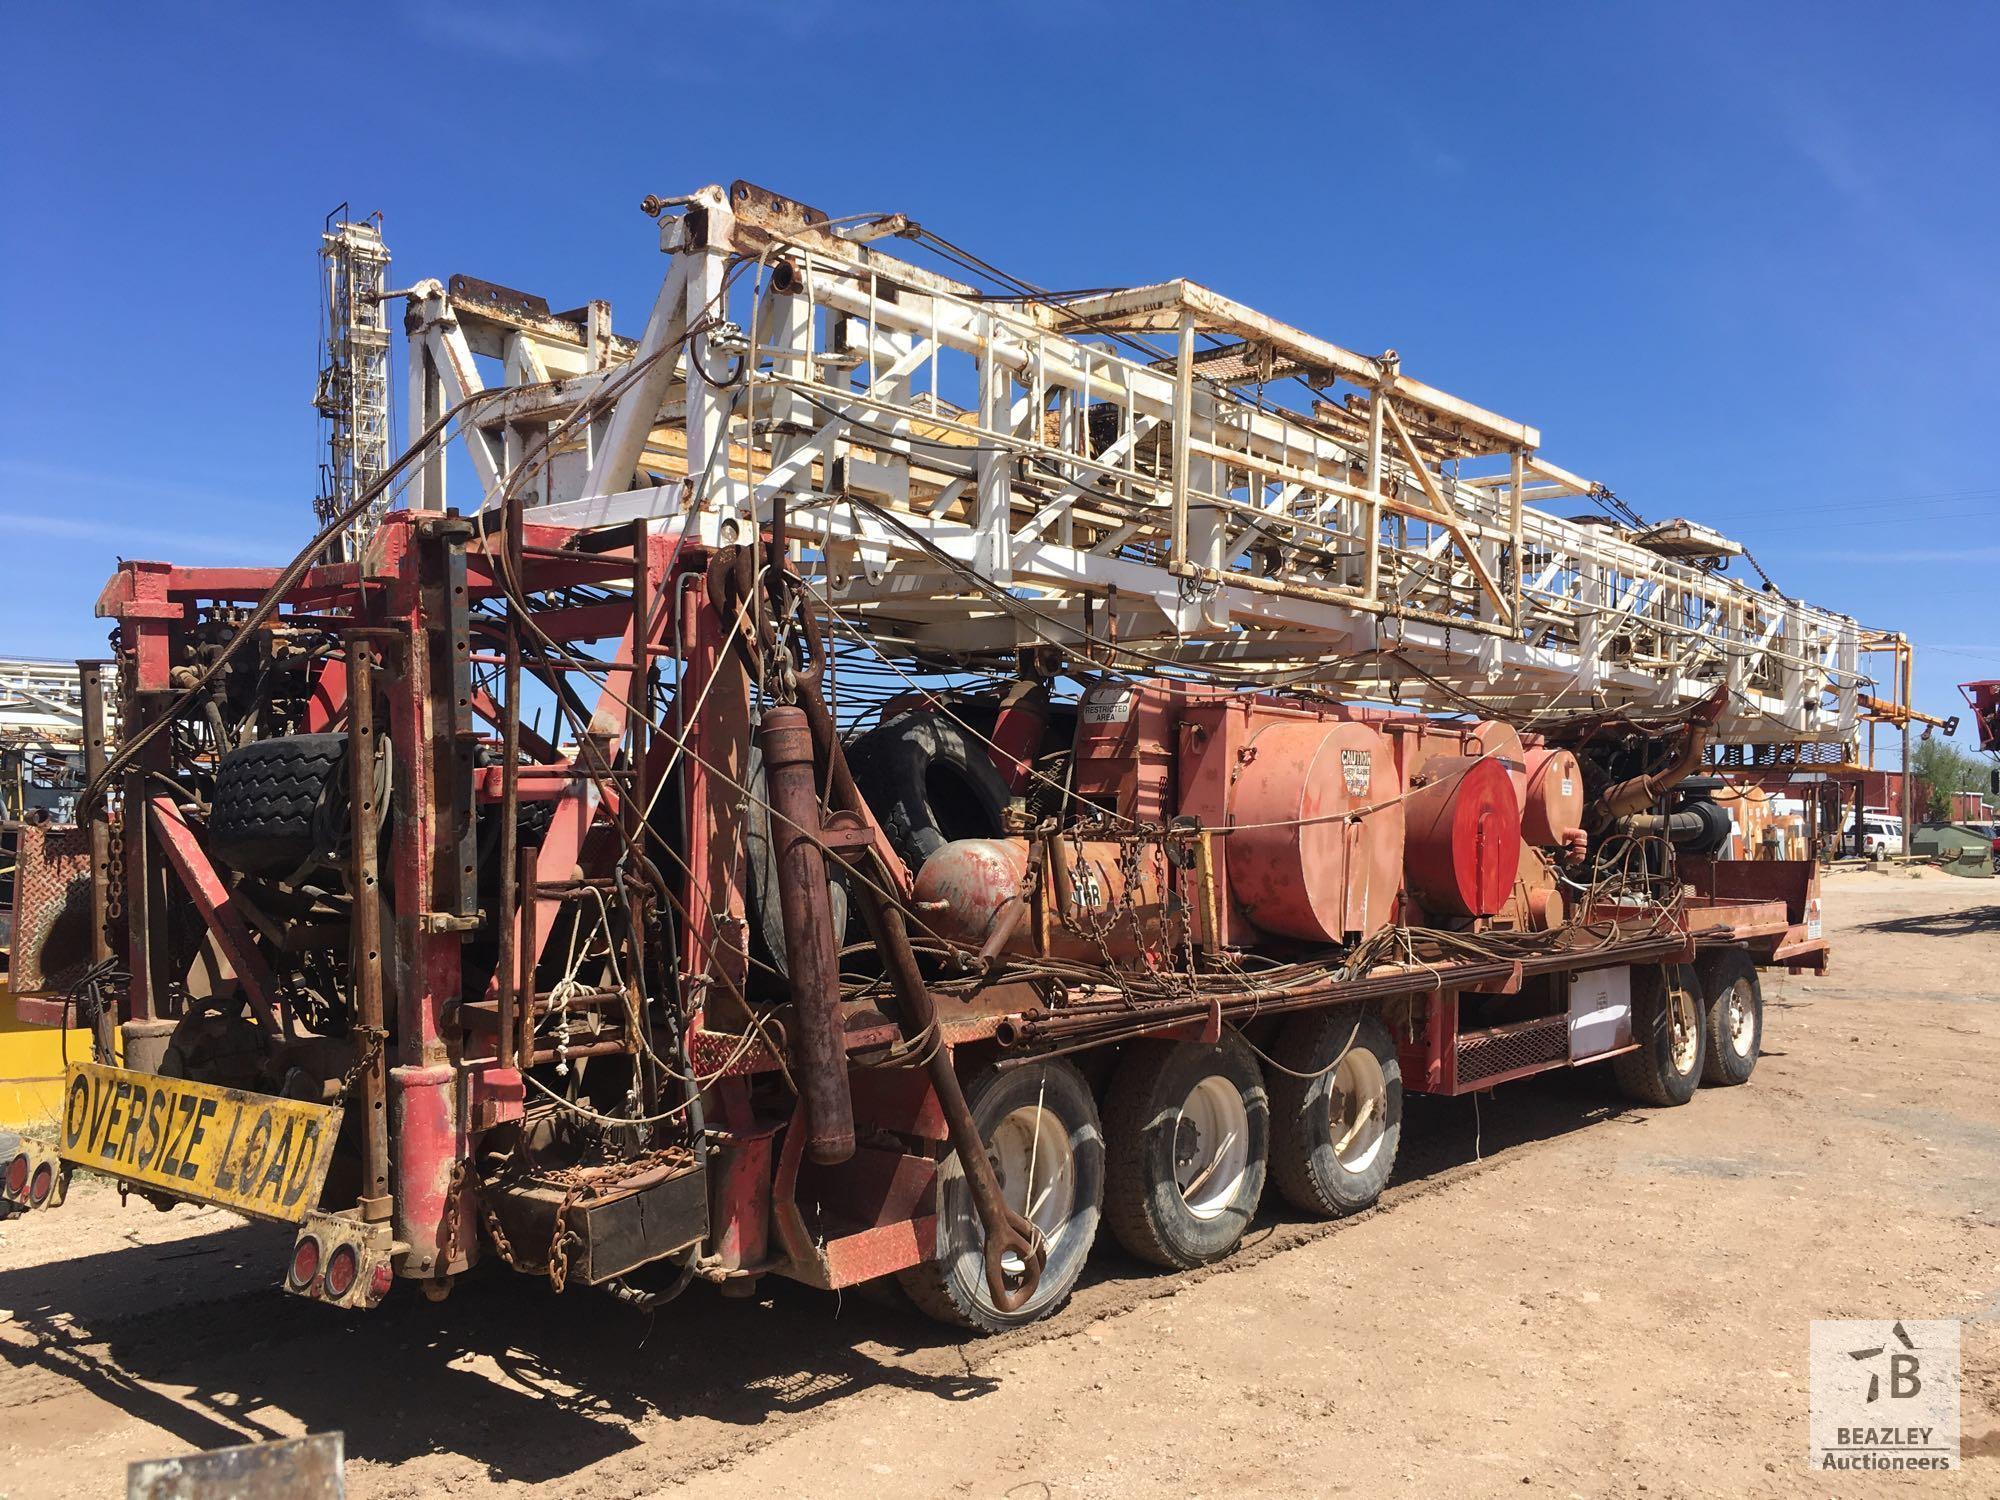 WILSON Back-In Well Service Rig [This item is being sold from 3005 FM 1936 Odessa, TX]